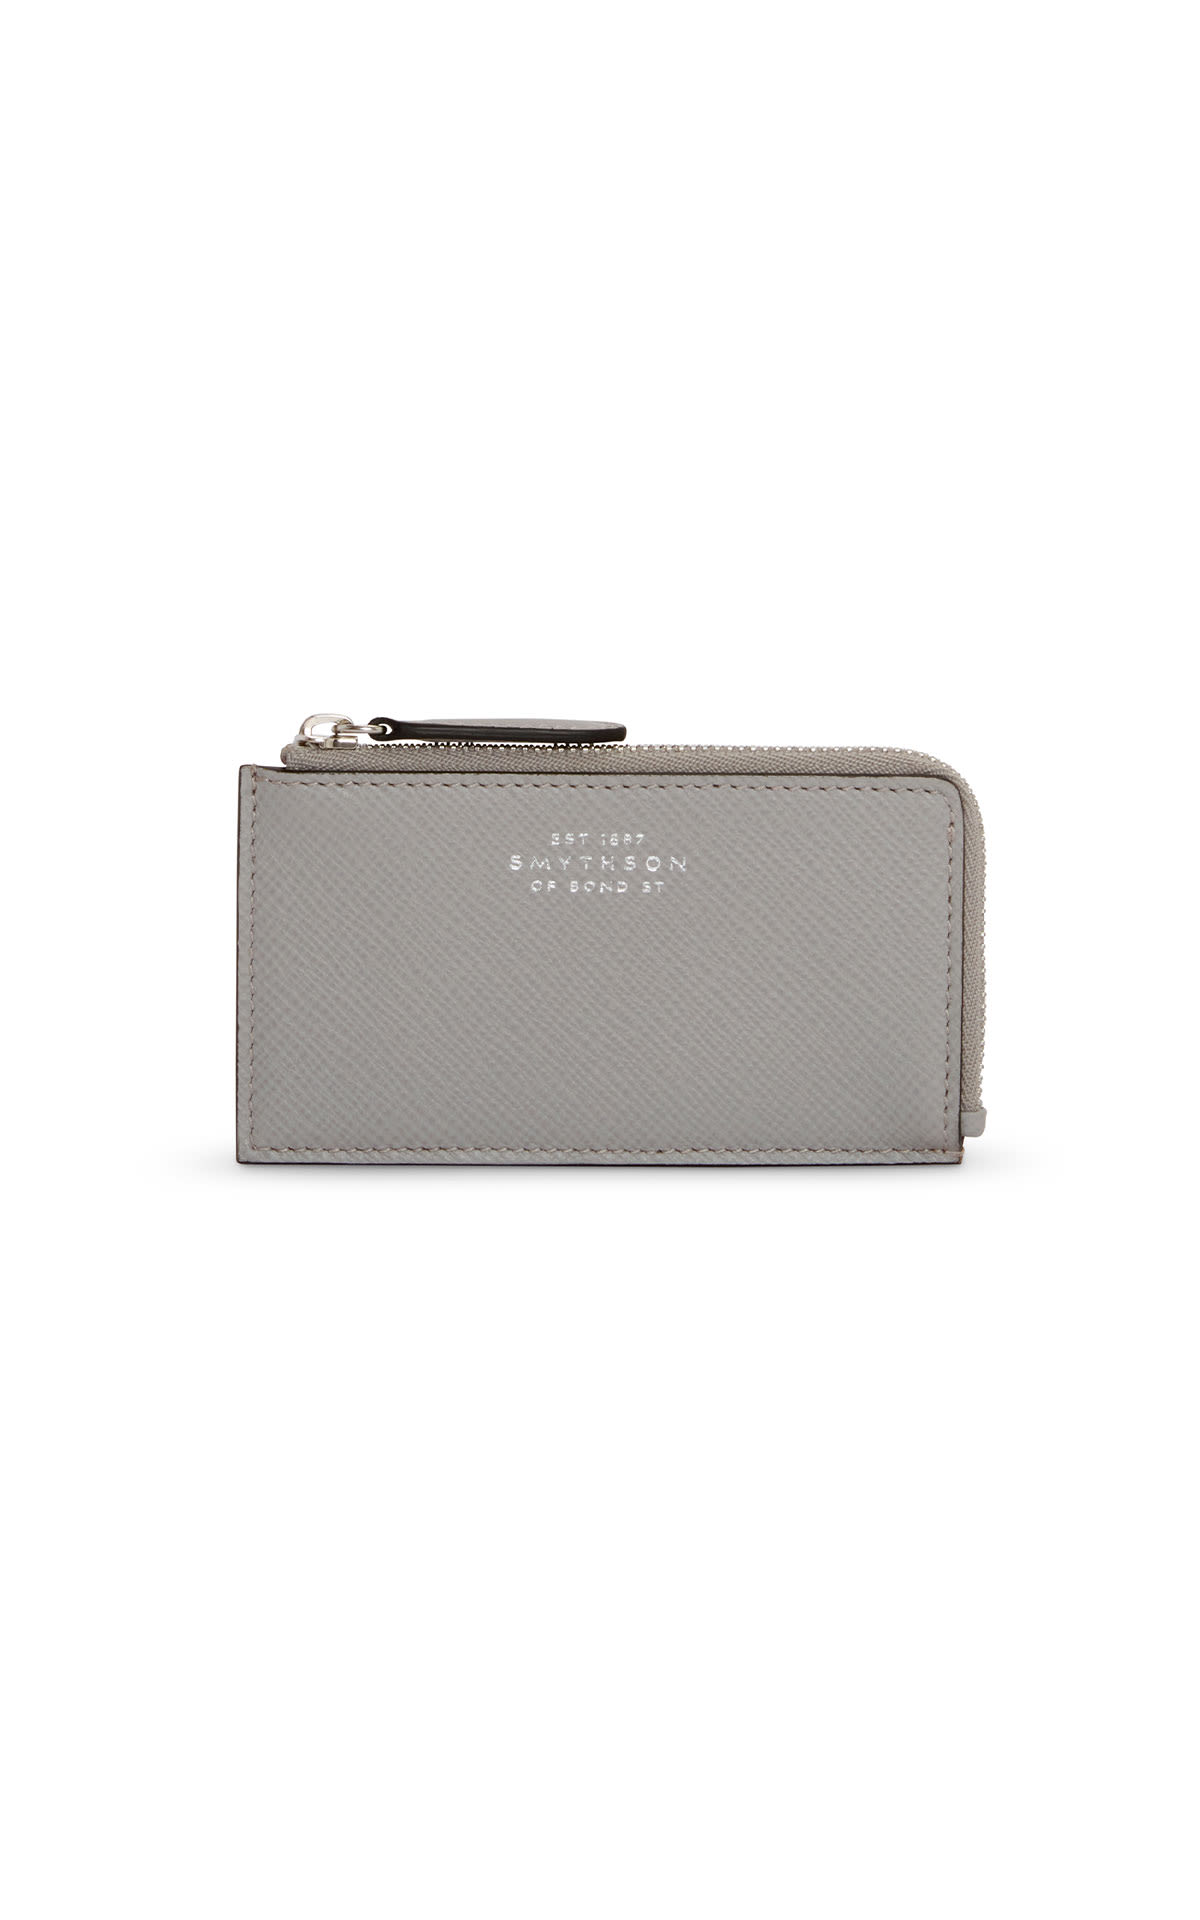 Smythson Panama 3cc flat coin purse from Bicester Village